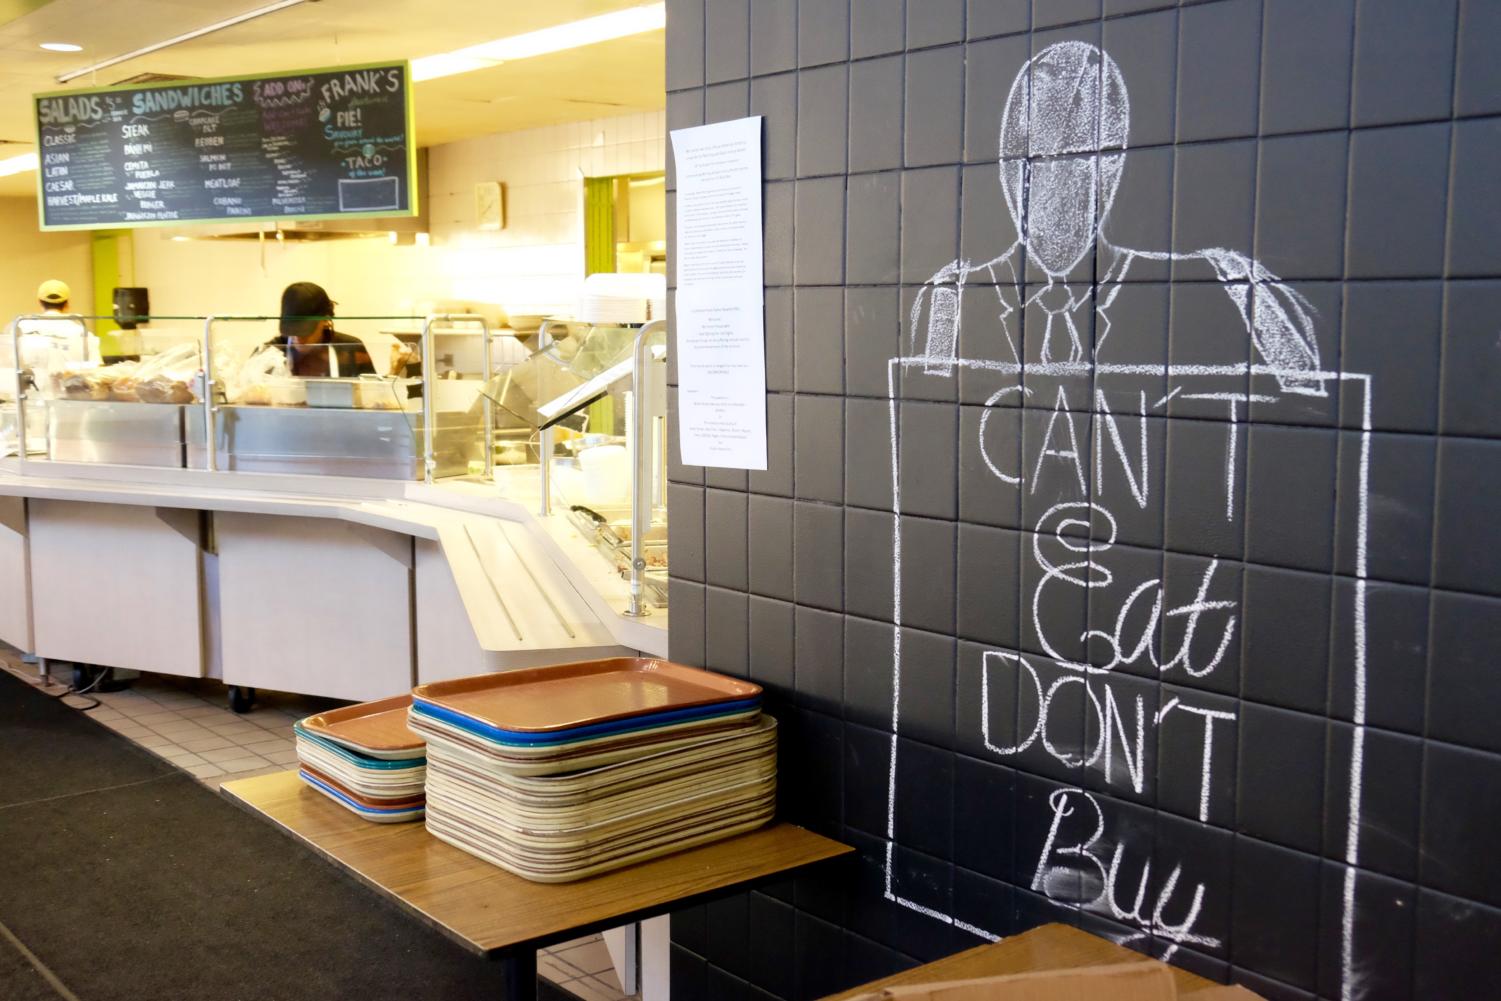 Akeem Haywood's chalk drawings don the walls as the artist works behind the counter.